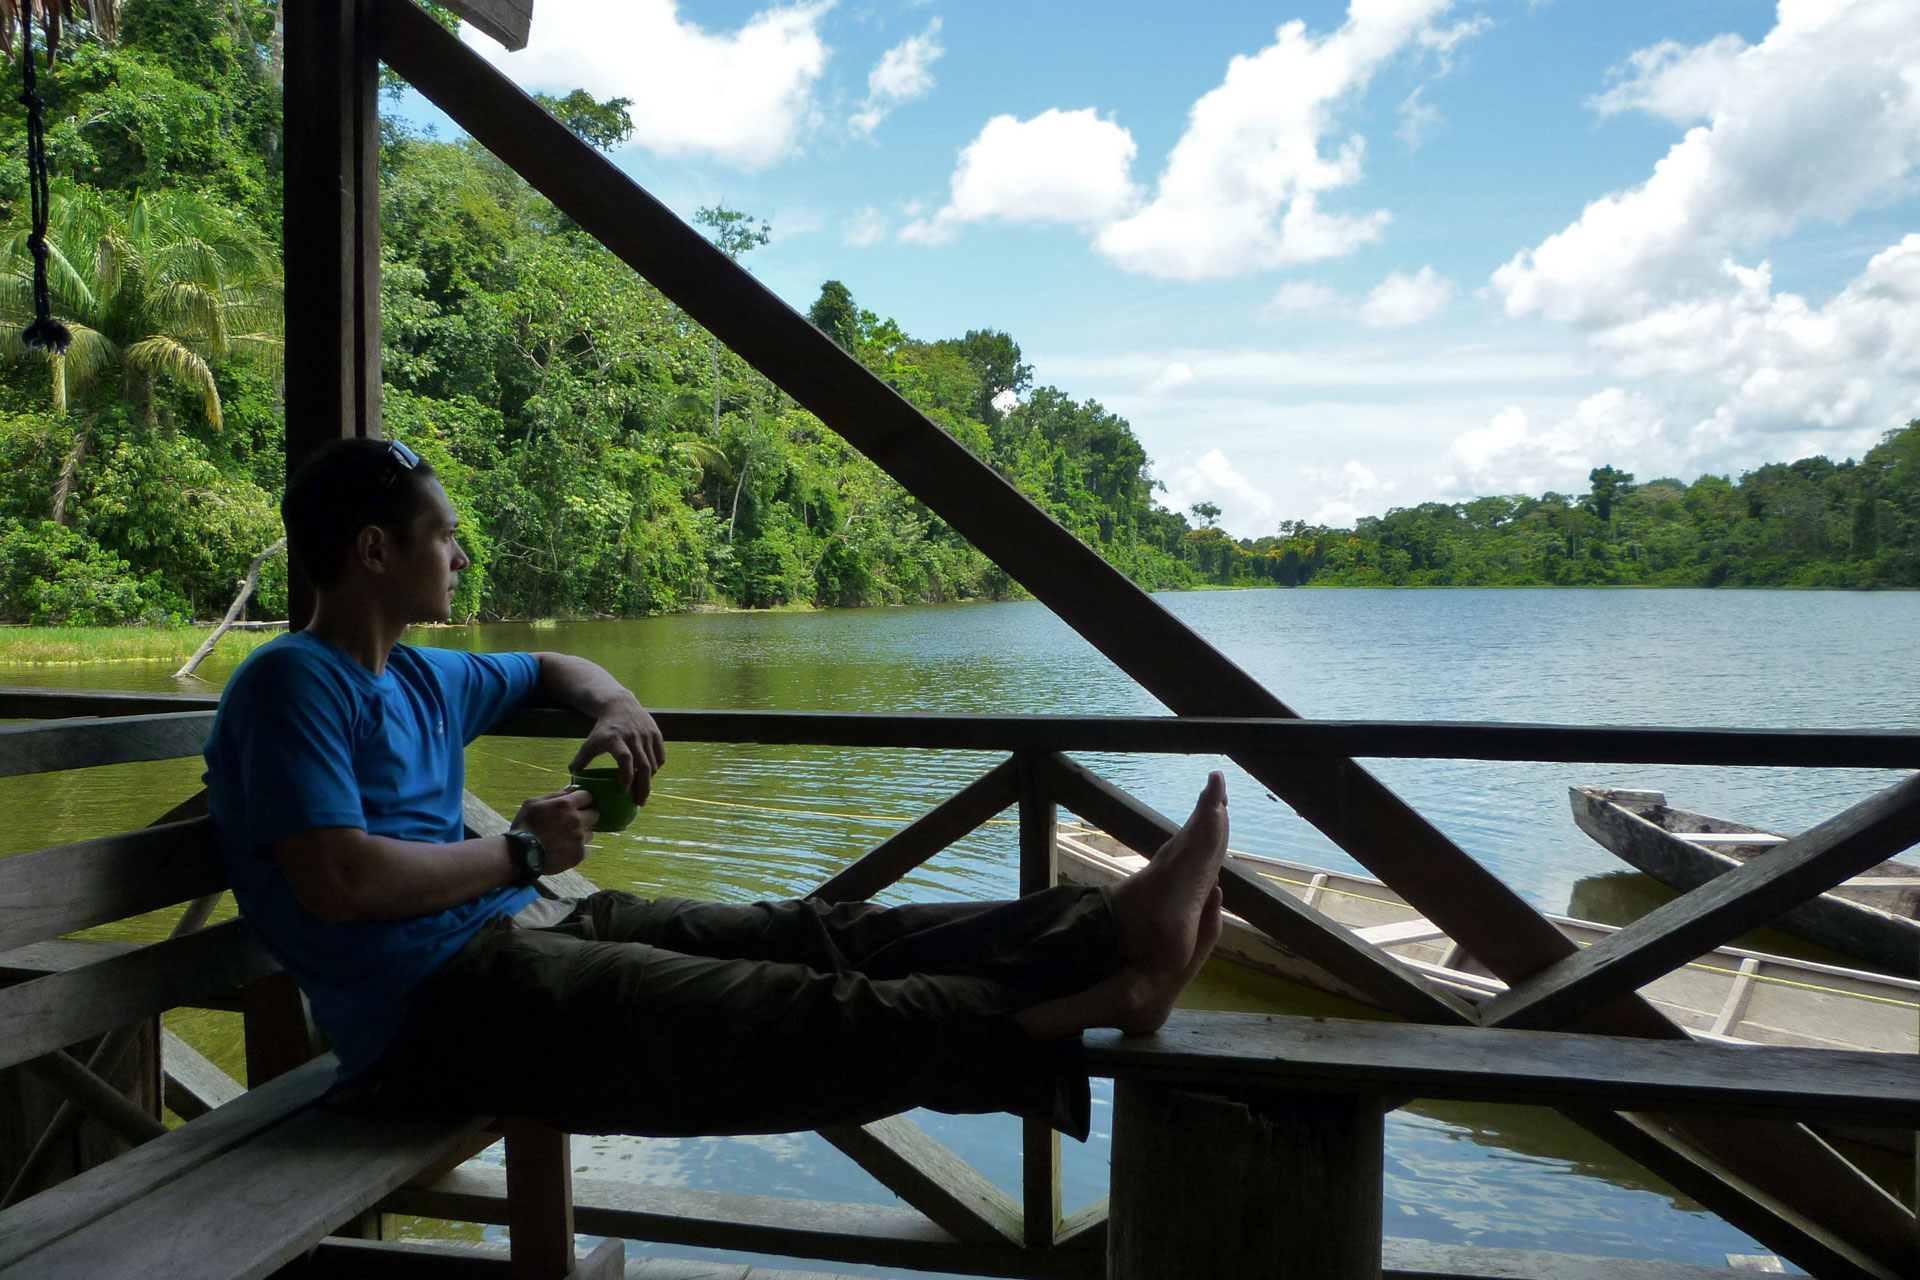 Relaxing by a lake in the Amazon